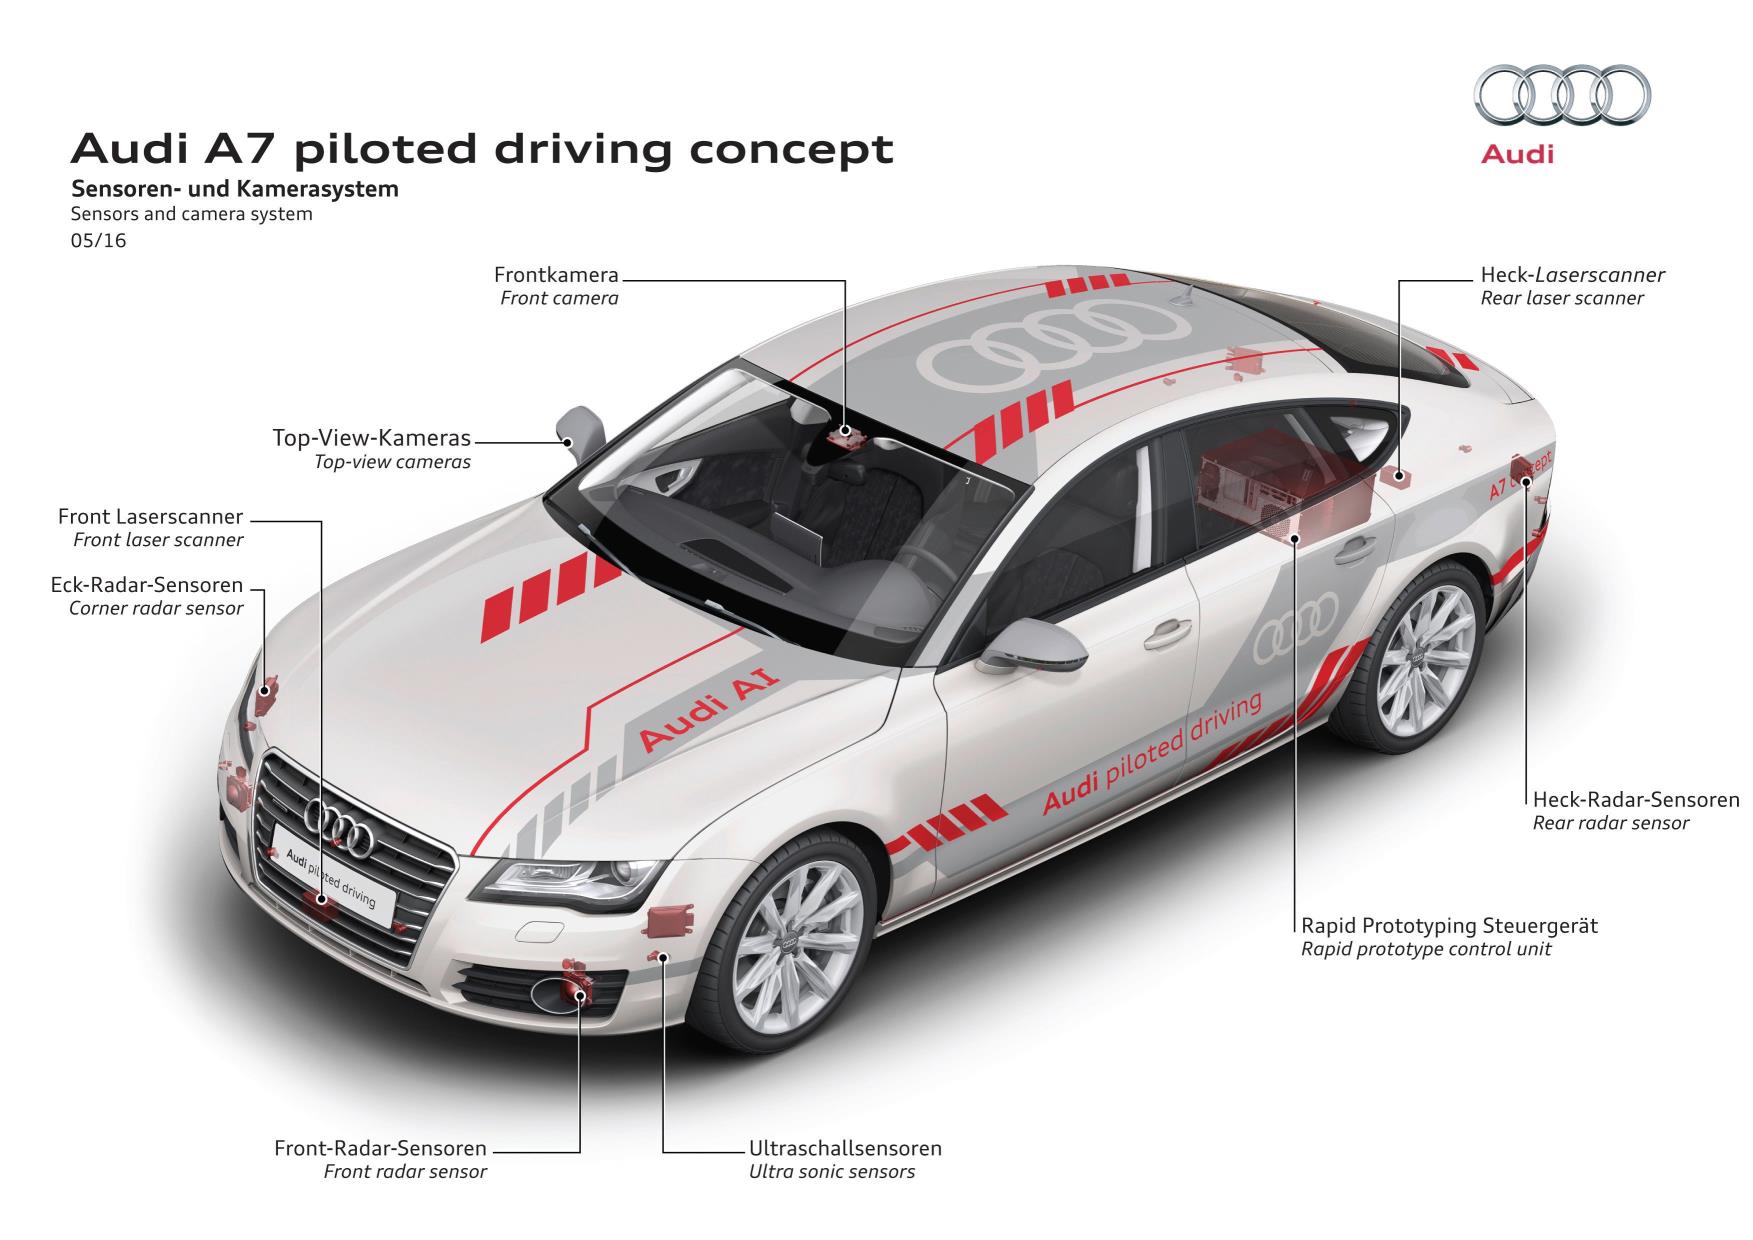 news-2016-audi-piloted-driving-graphic-1-1